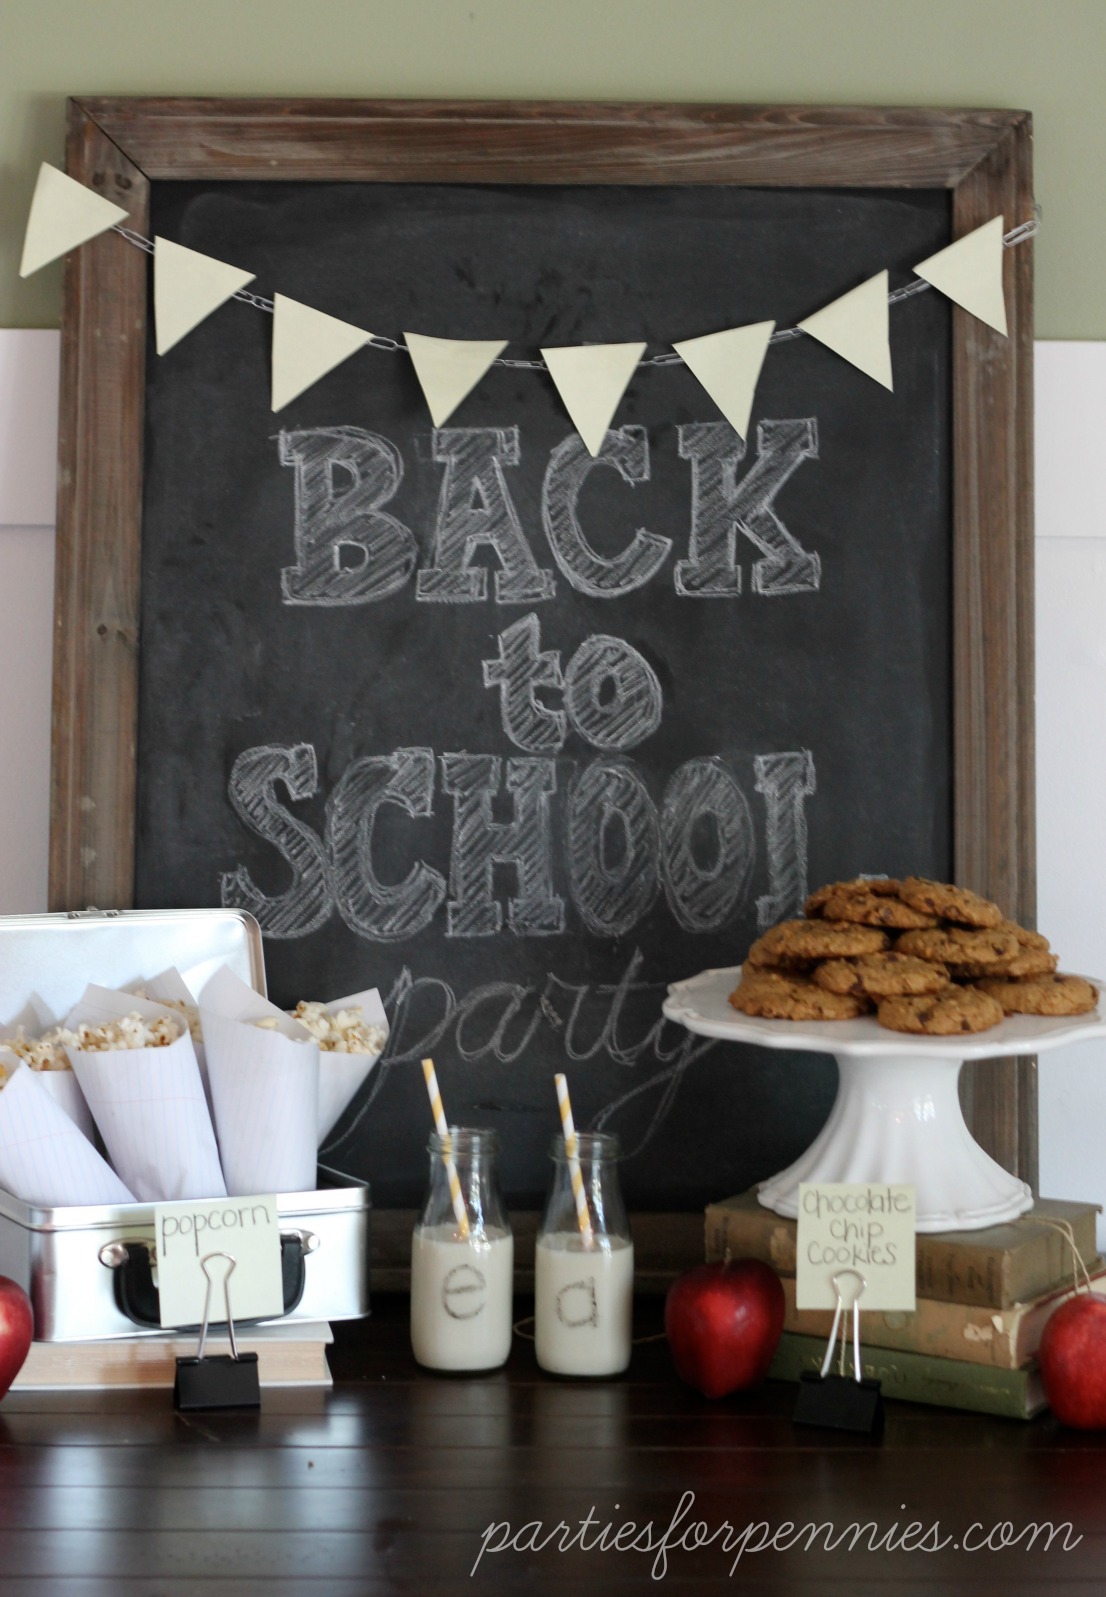 Back-To-School-Party-by-PartiesforPennies.com-